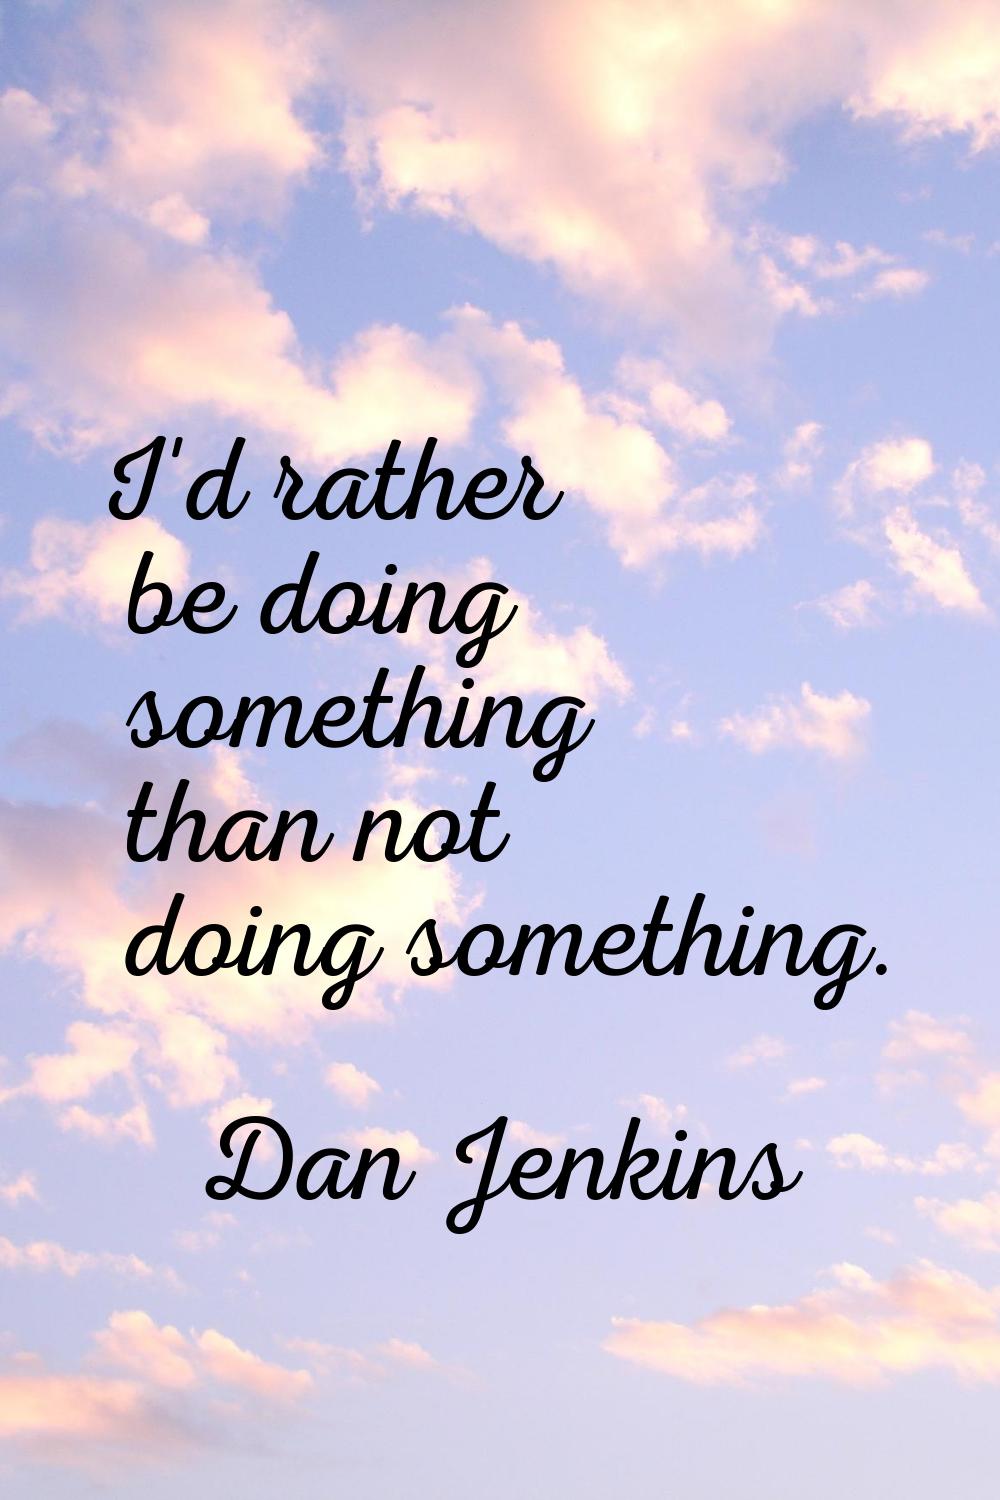 I'd rather be doing something than not doing something.